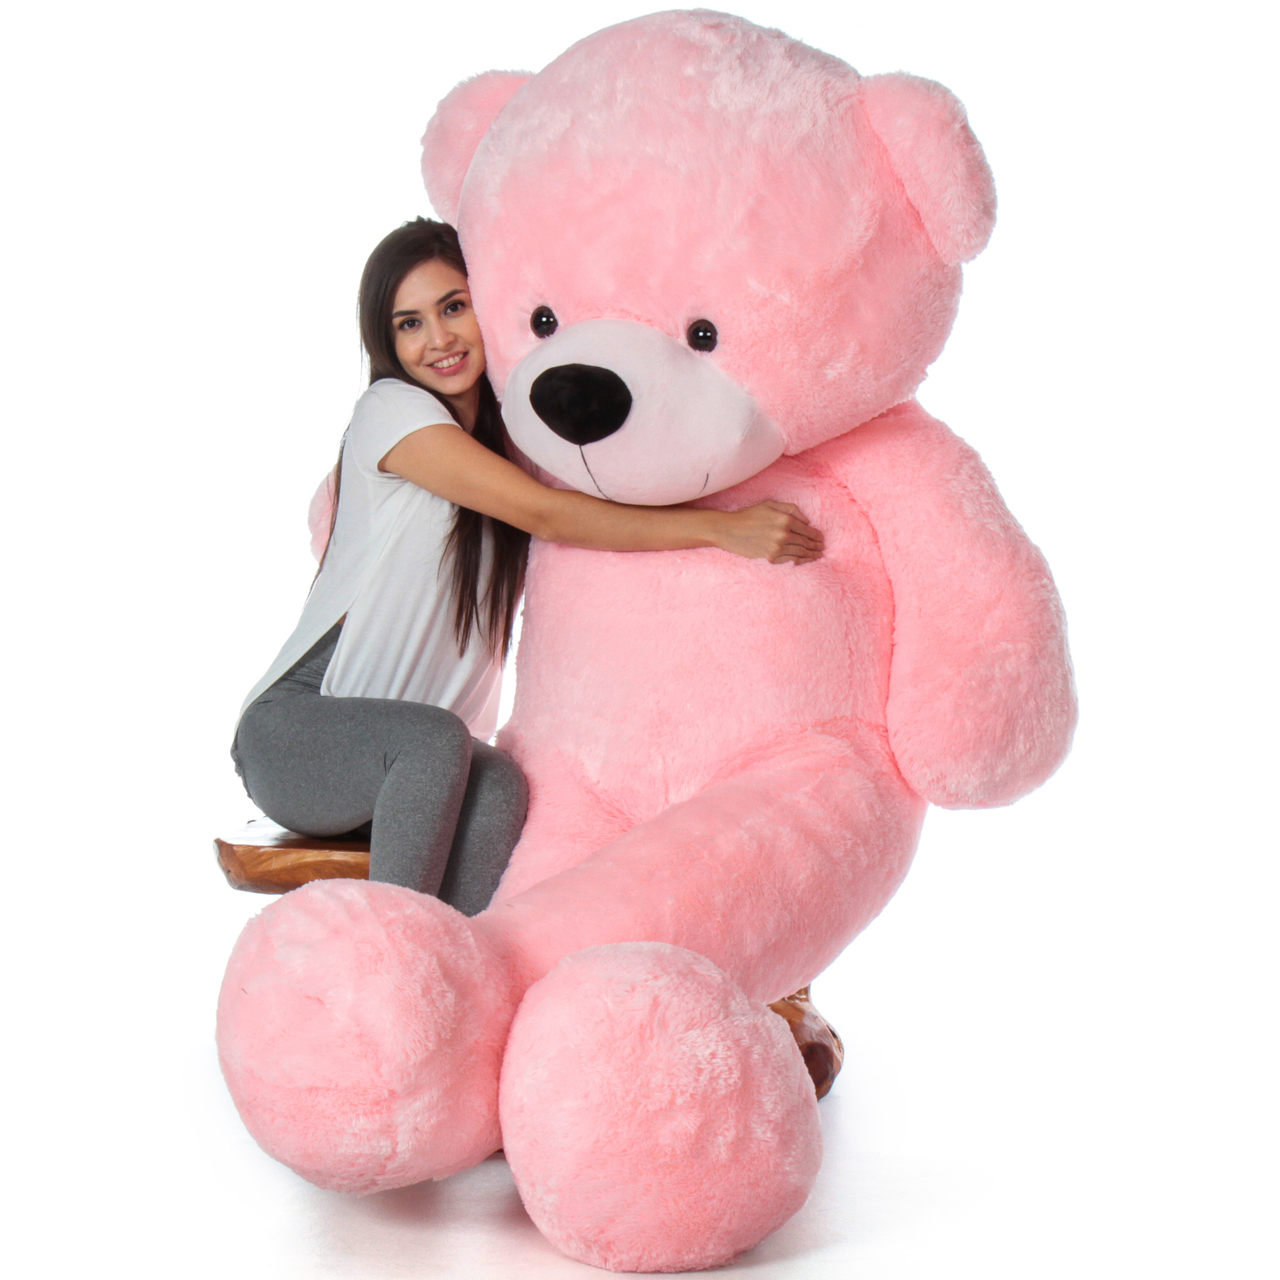 6ft Giant Life Size Pink Teddy Bear Lady Cuddles